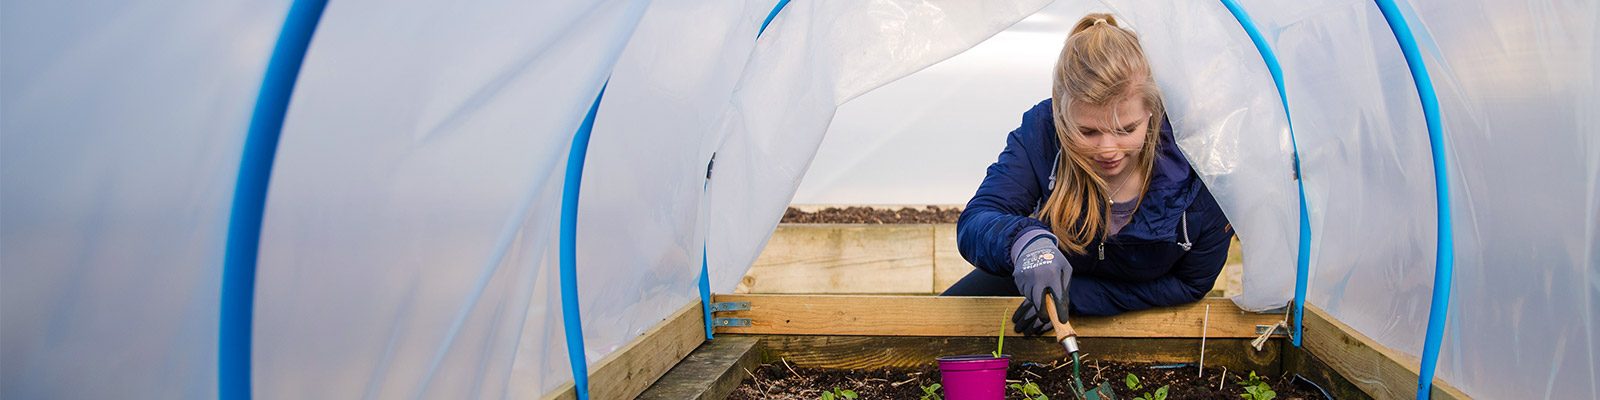 A student tends plants in a polytunnel